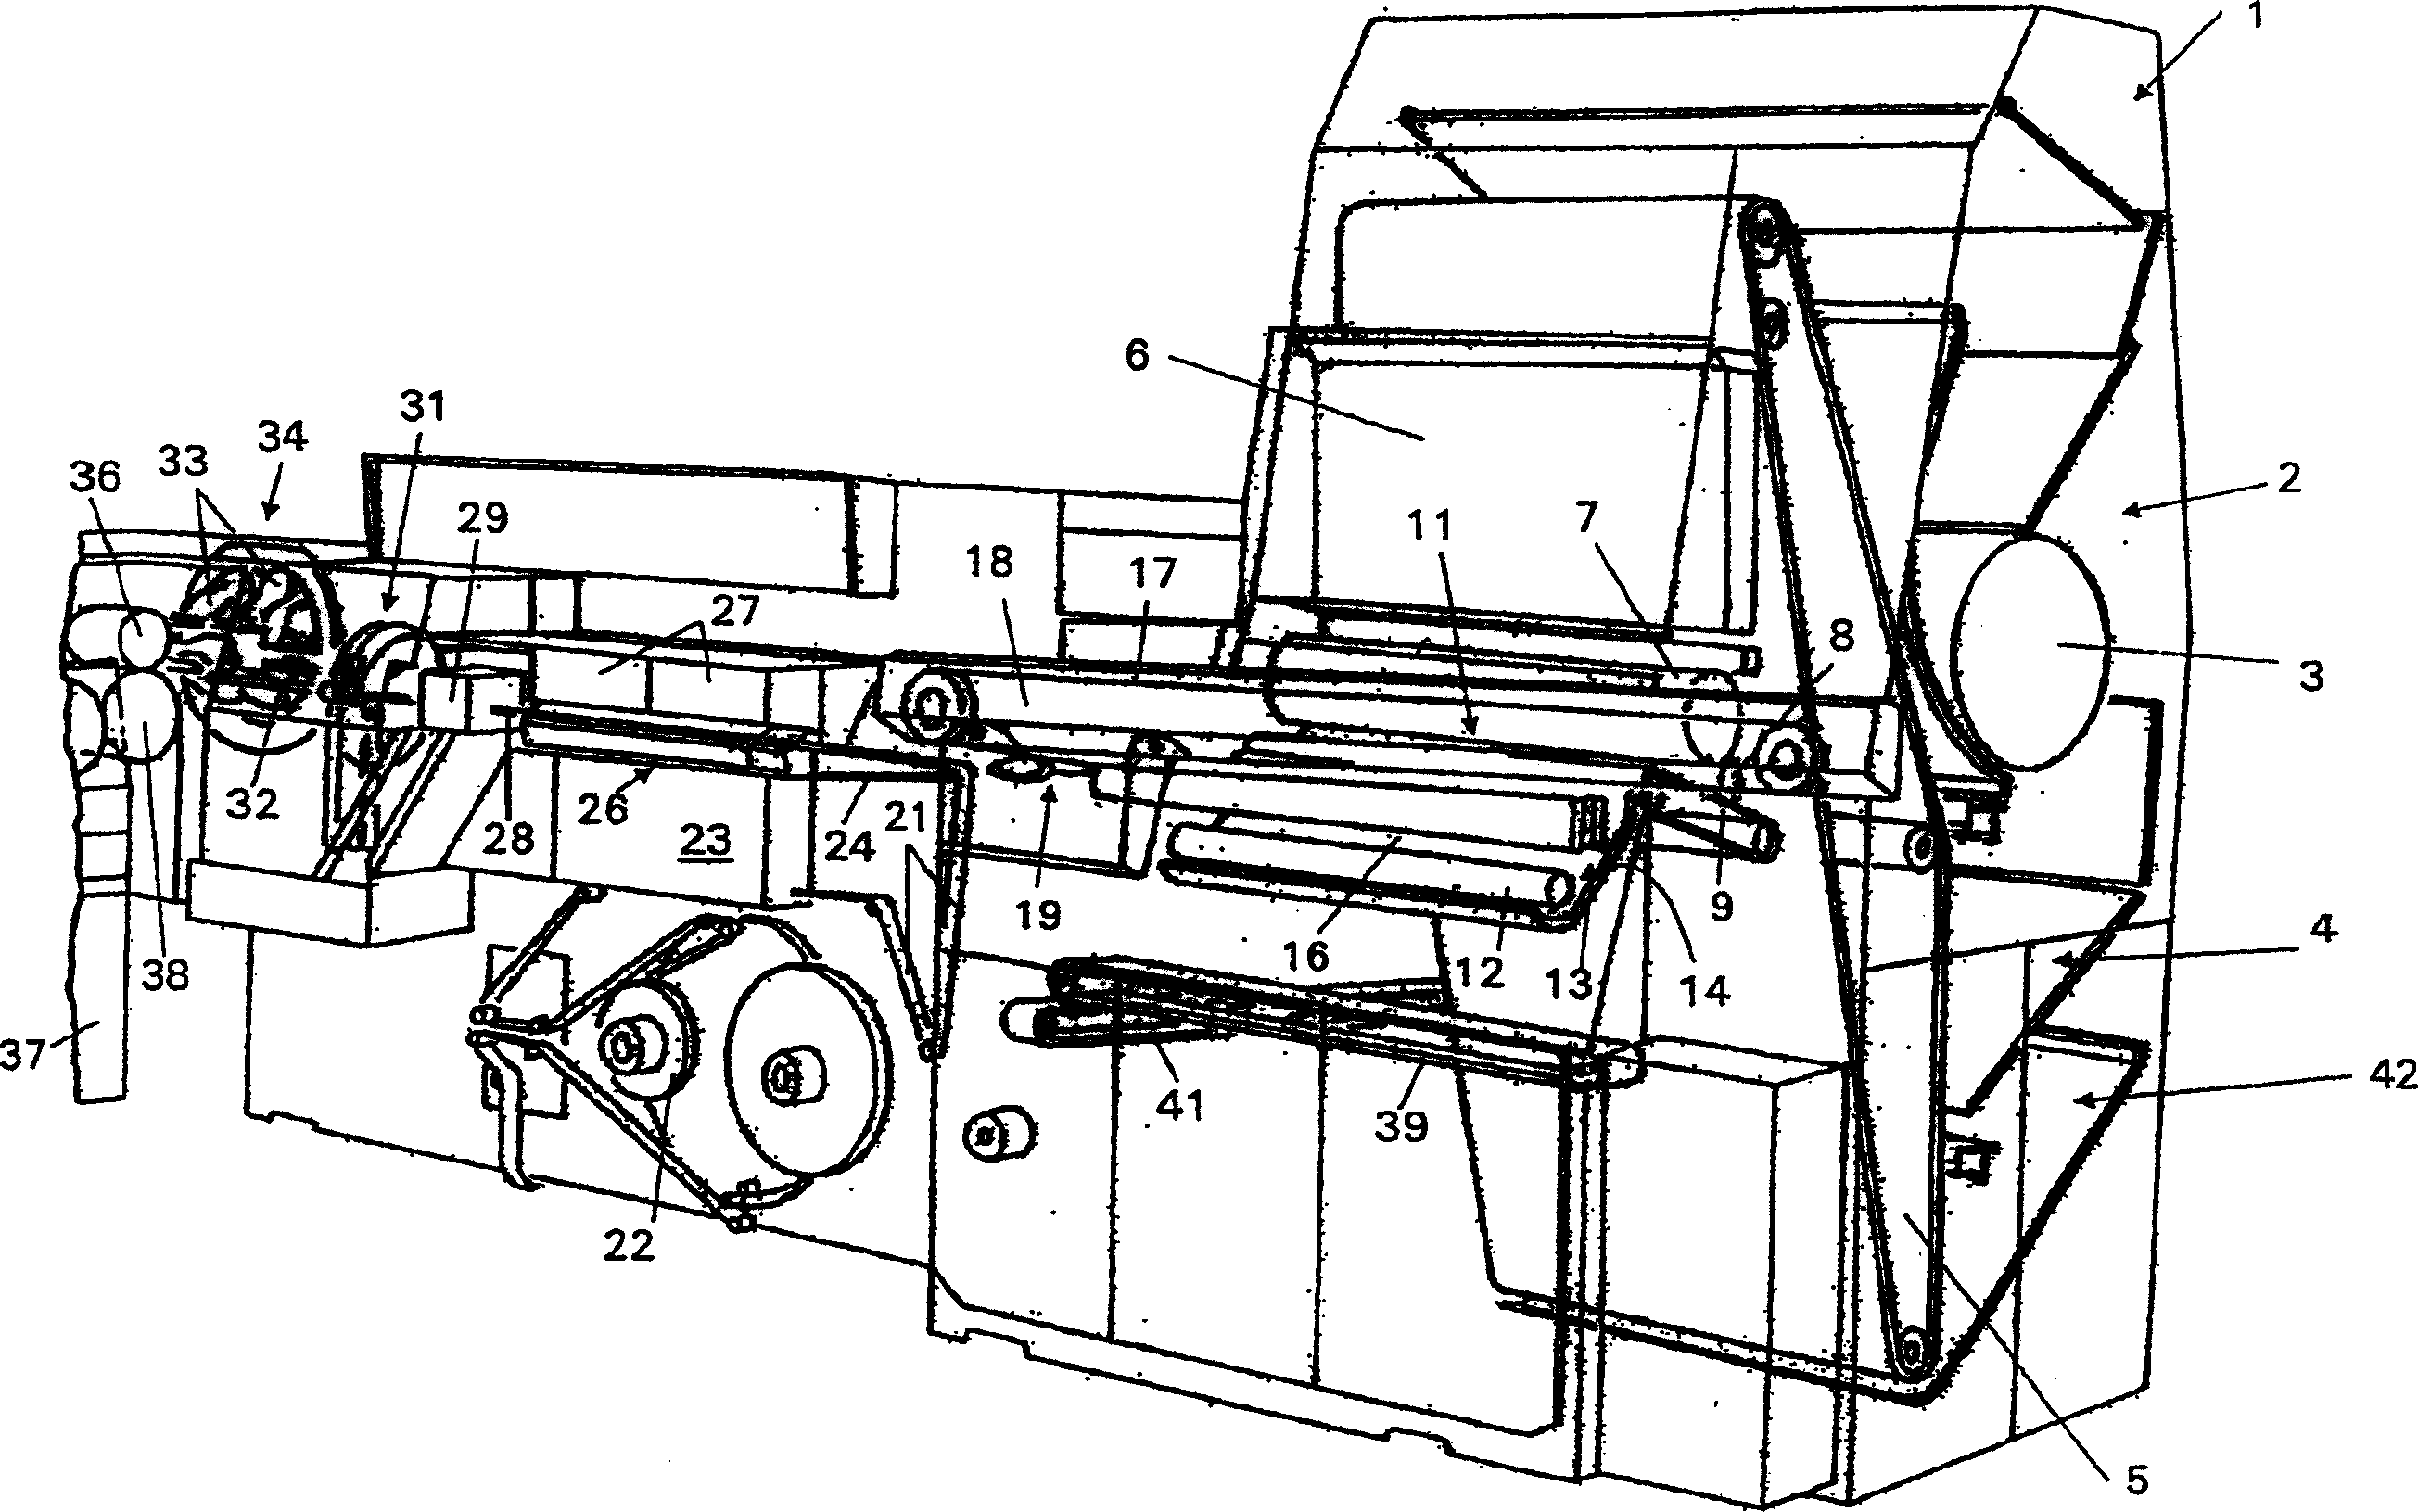 Rotating printing unit for a machine of the tobacco processing industry